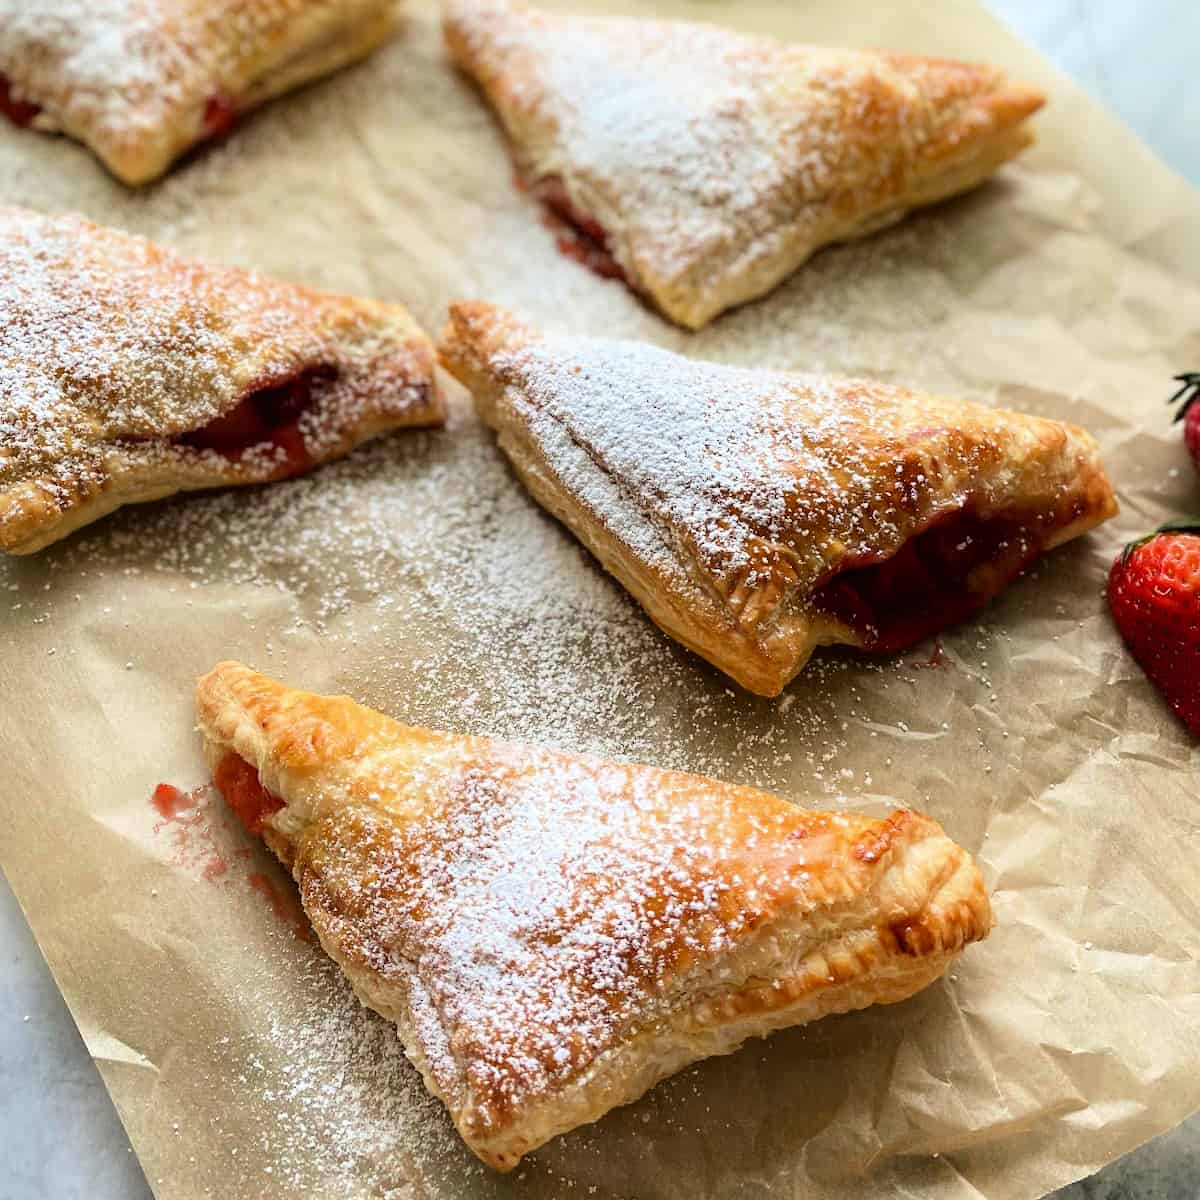 5 triangle turnovers dusted with powdered sugar on brown paper.